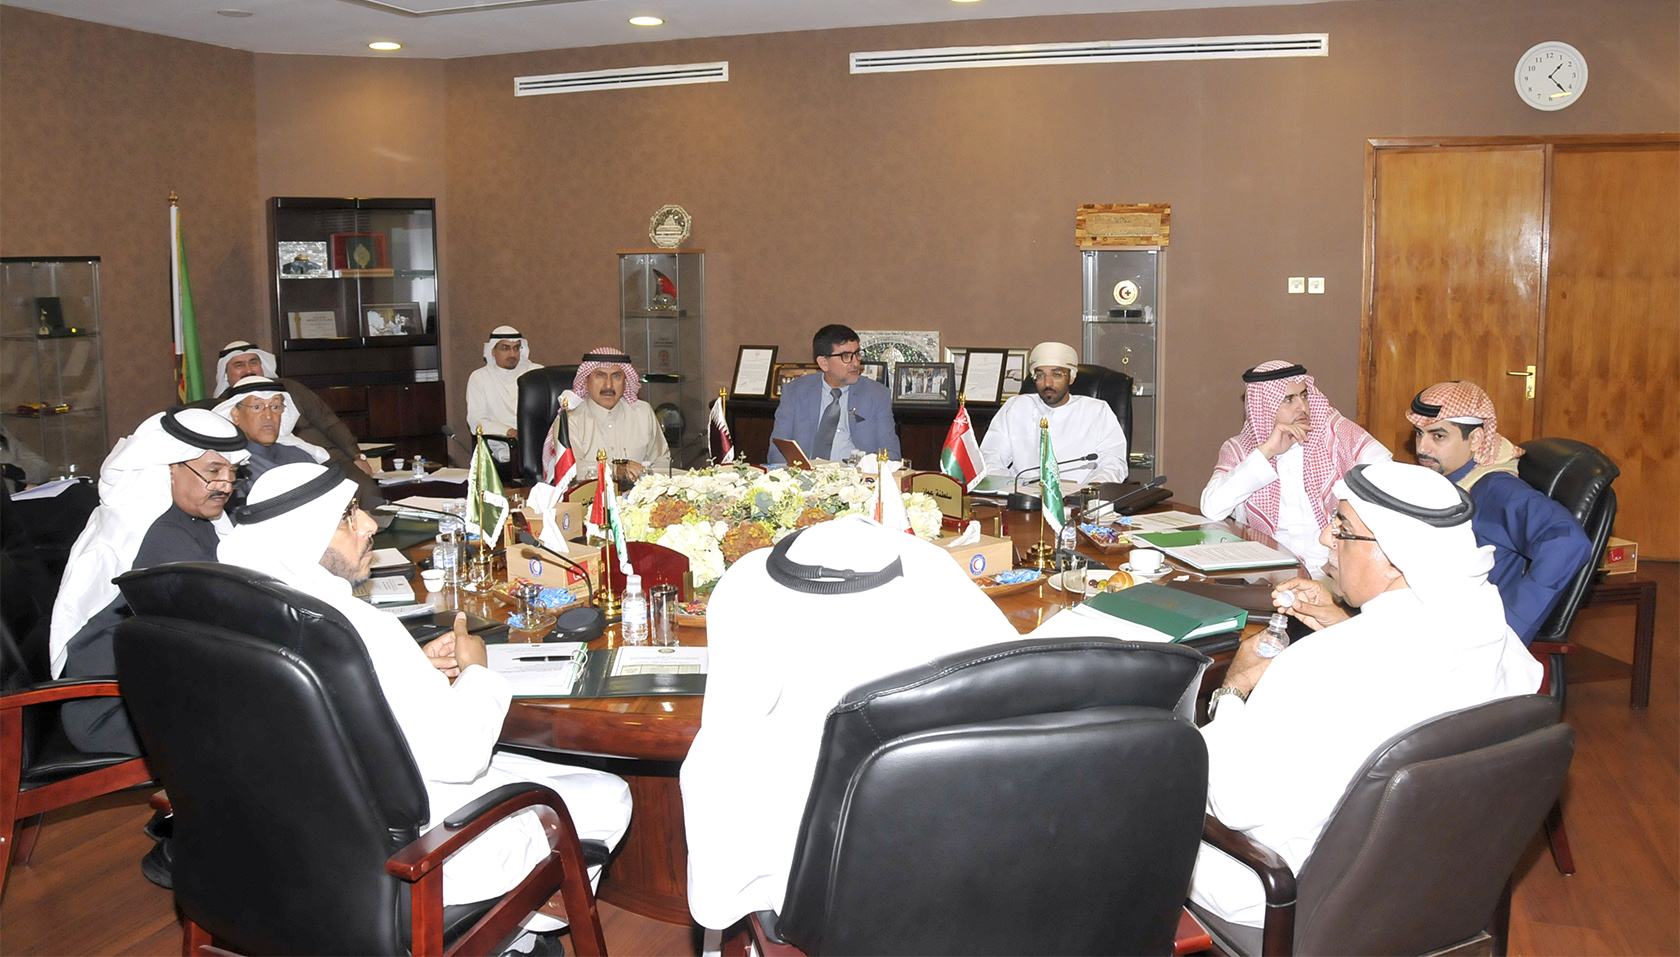 The 14th meeting of the Senior officials from Red Crescent societies across the Arab Gulf region